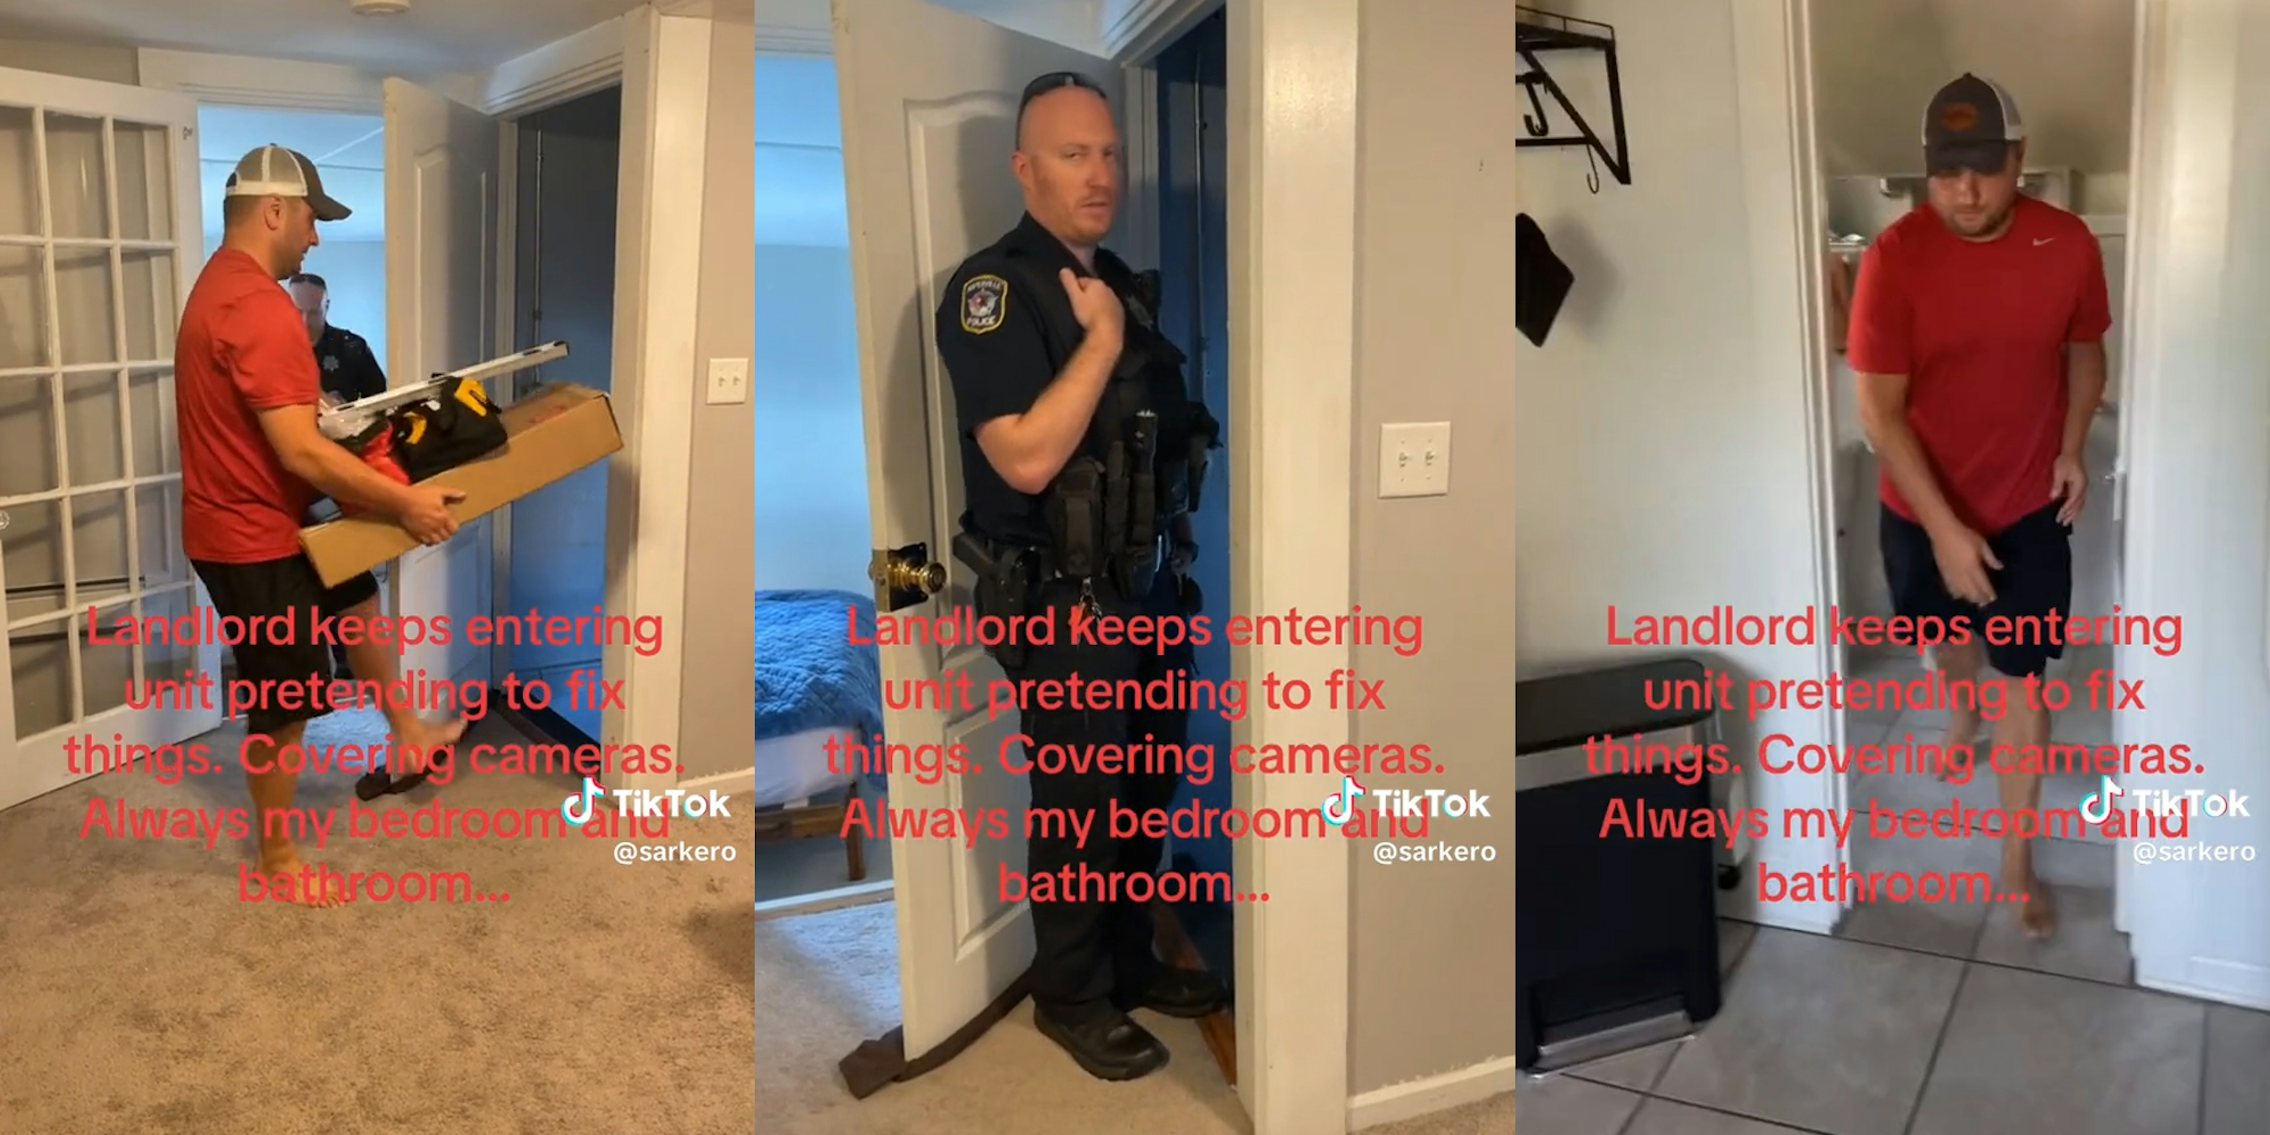 man carrying tools (l) police standing in doorway (c) man walking out of bathroom (r) all with caption 'landlord keeps entering unit pretending to fix things. covering cameras. always my bedroom and bathroom...'